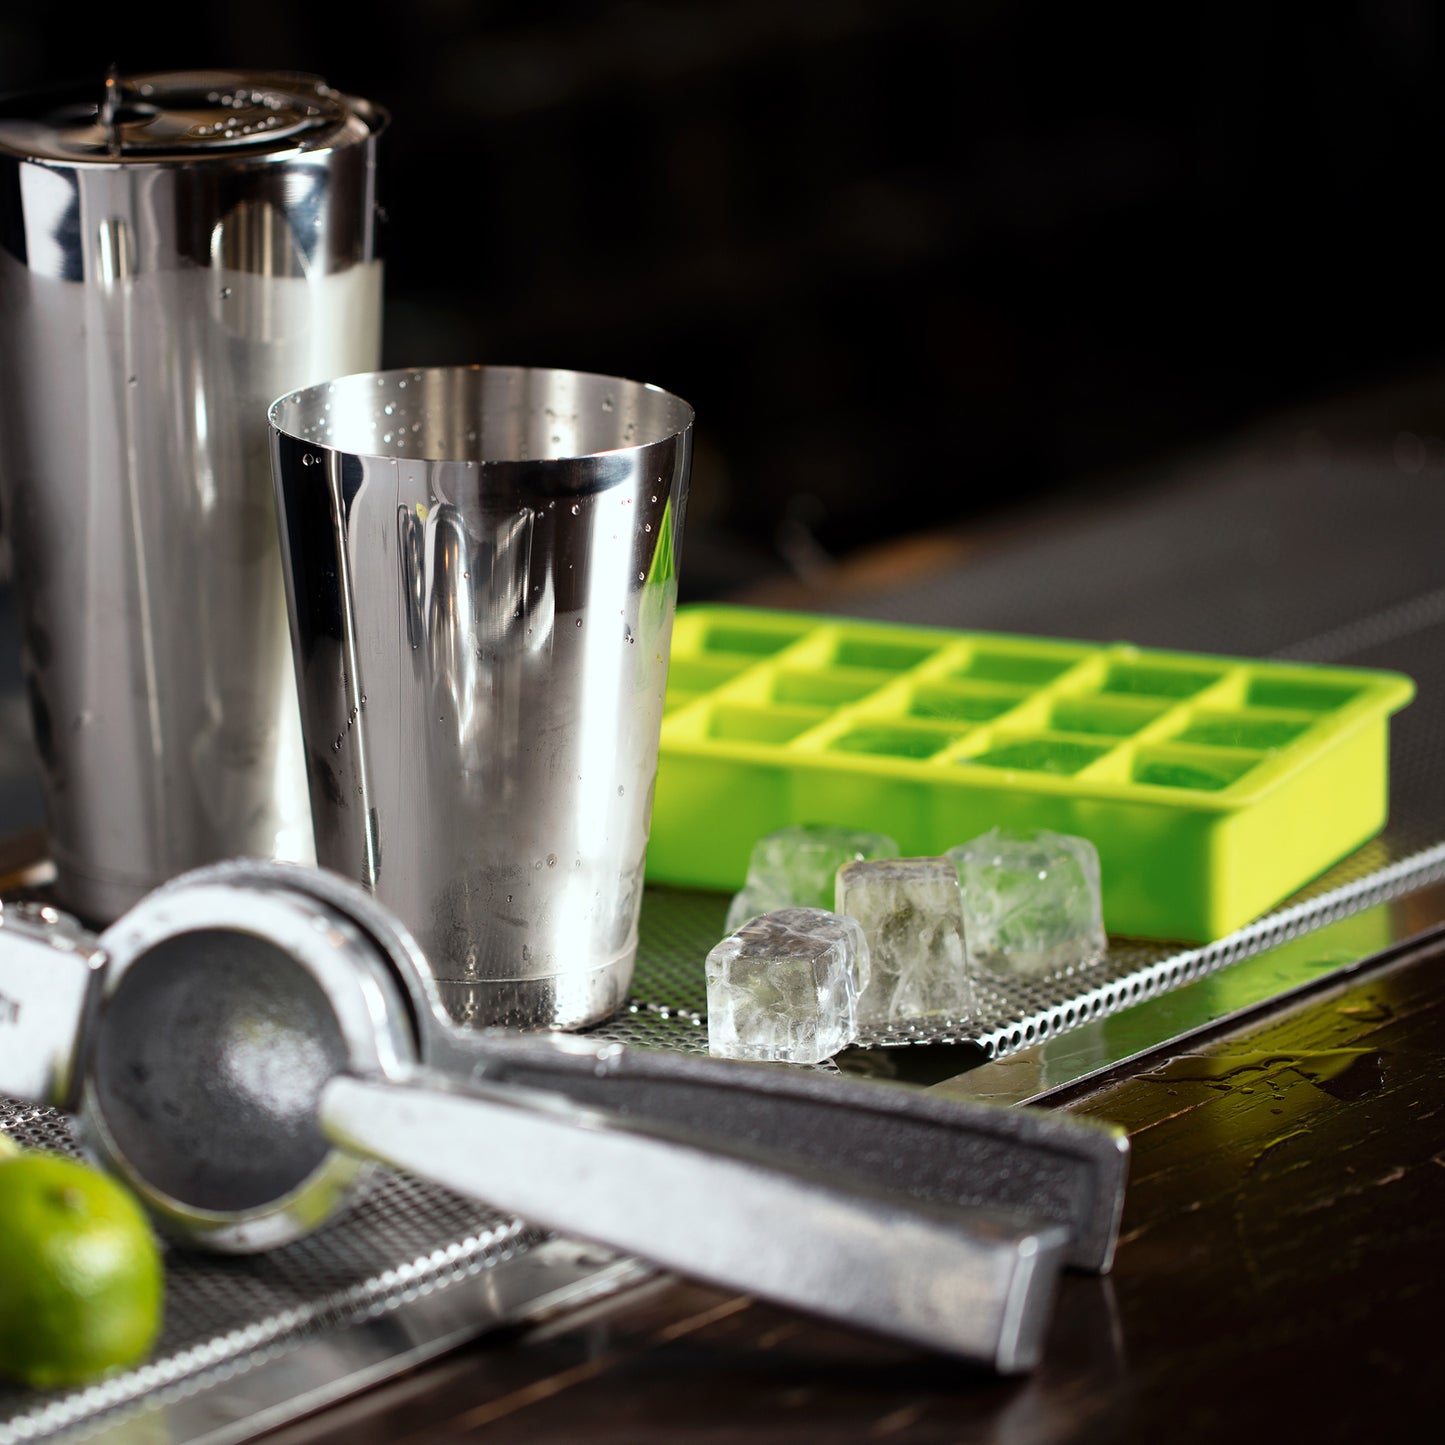 1.25in SQUARE ICE CUBE TRAY – FOOD GRADE RUBBER / GREEN